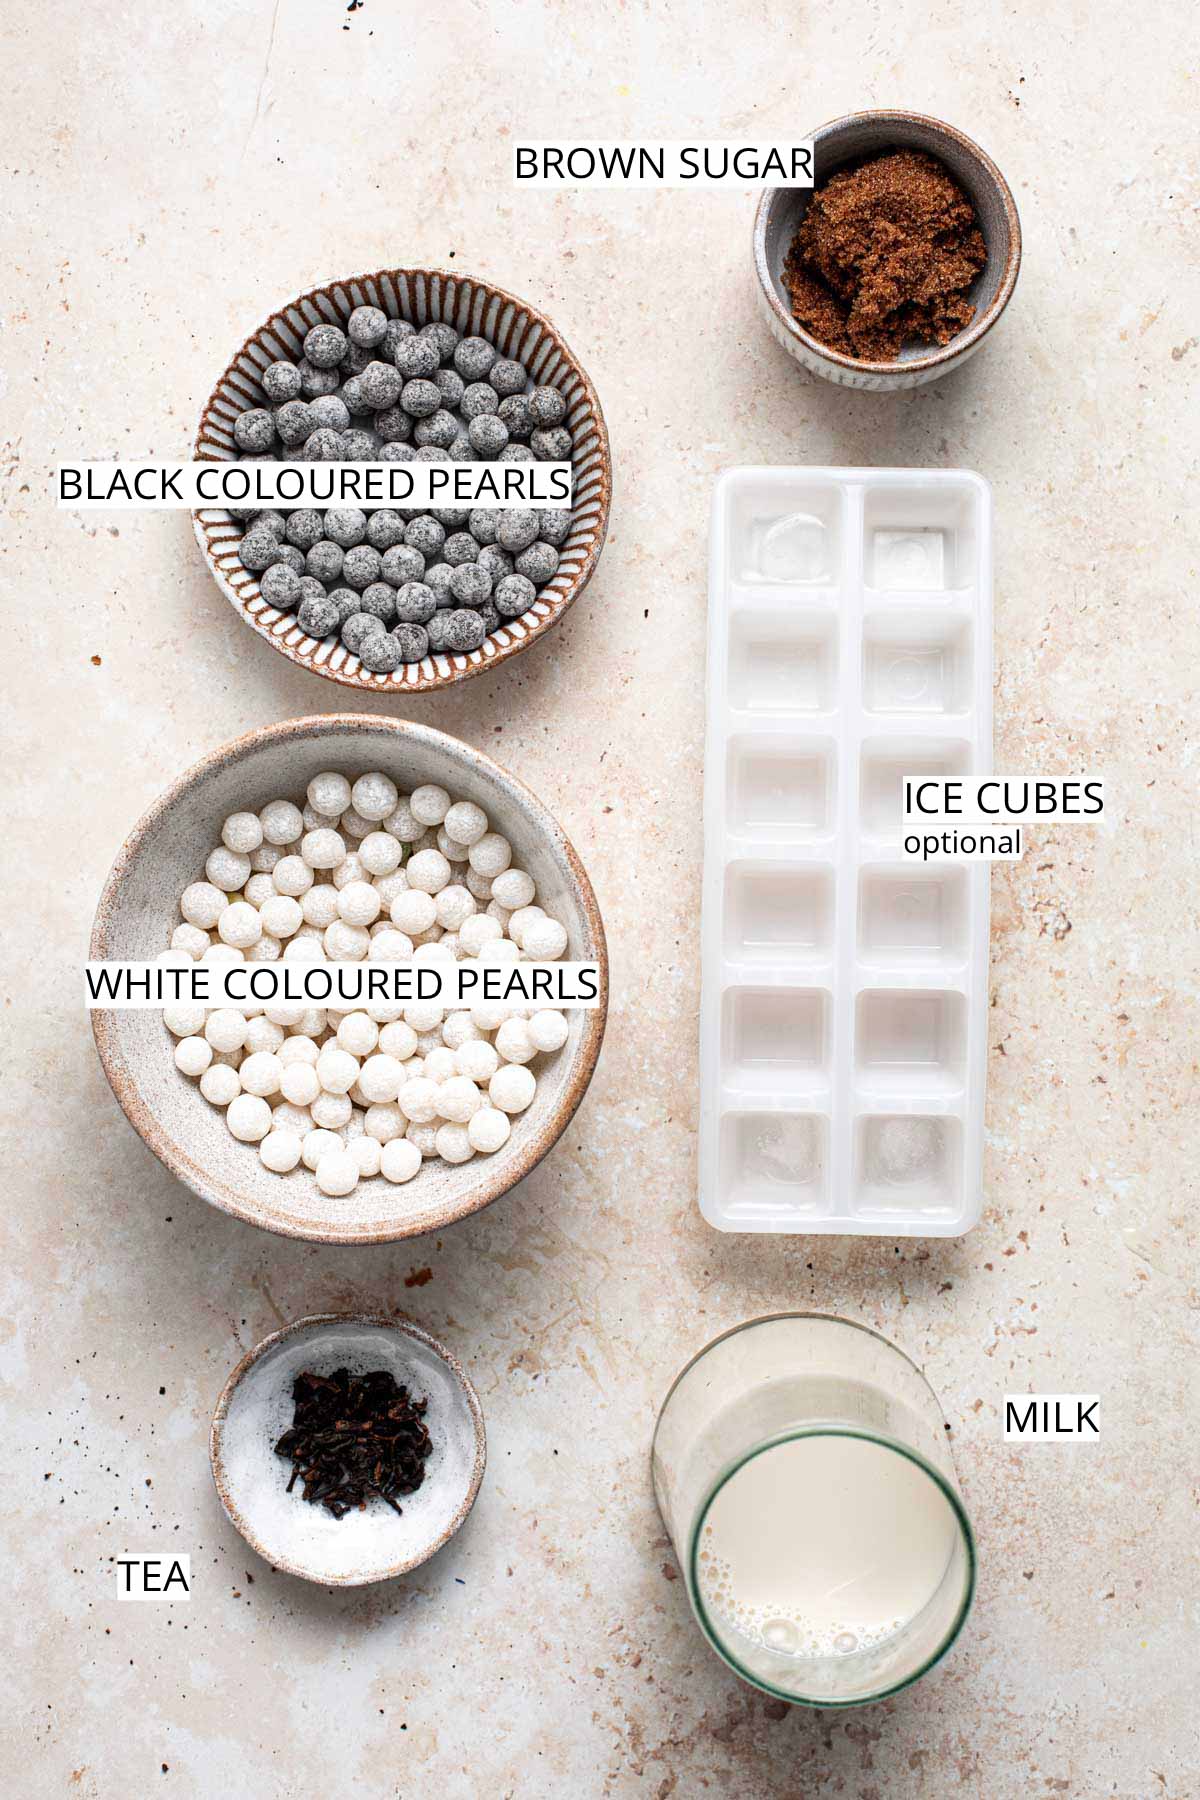 All ingredients needed to make panda milk tea on a flat surface.